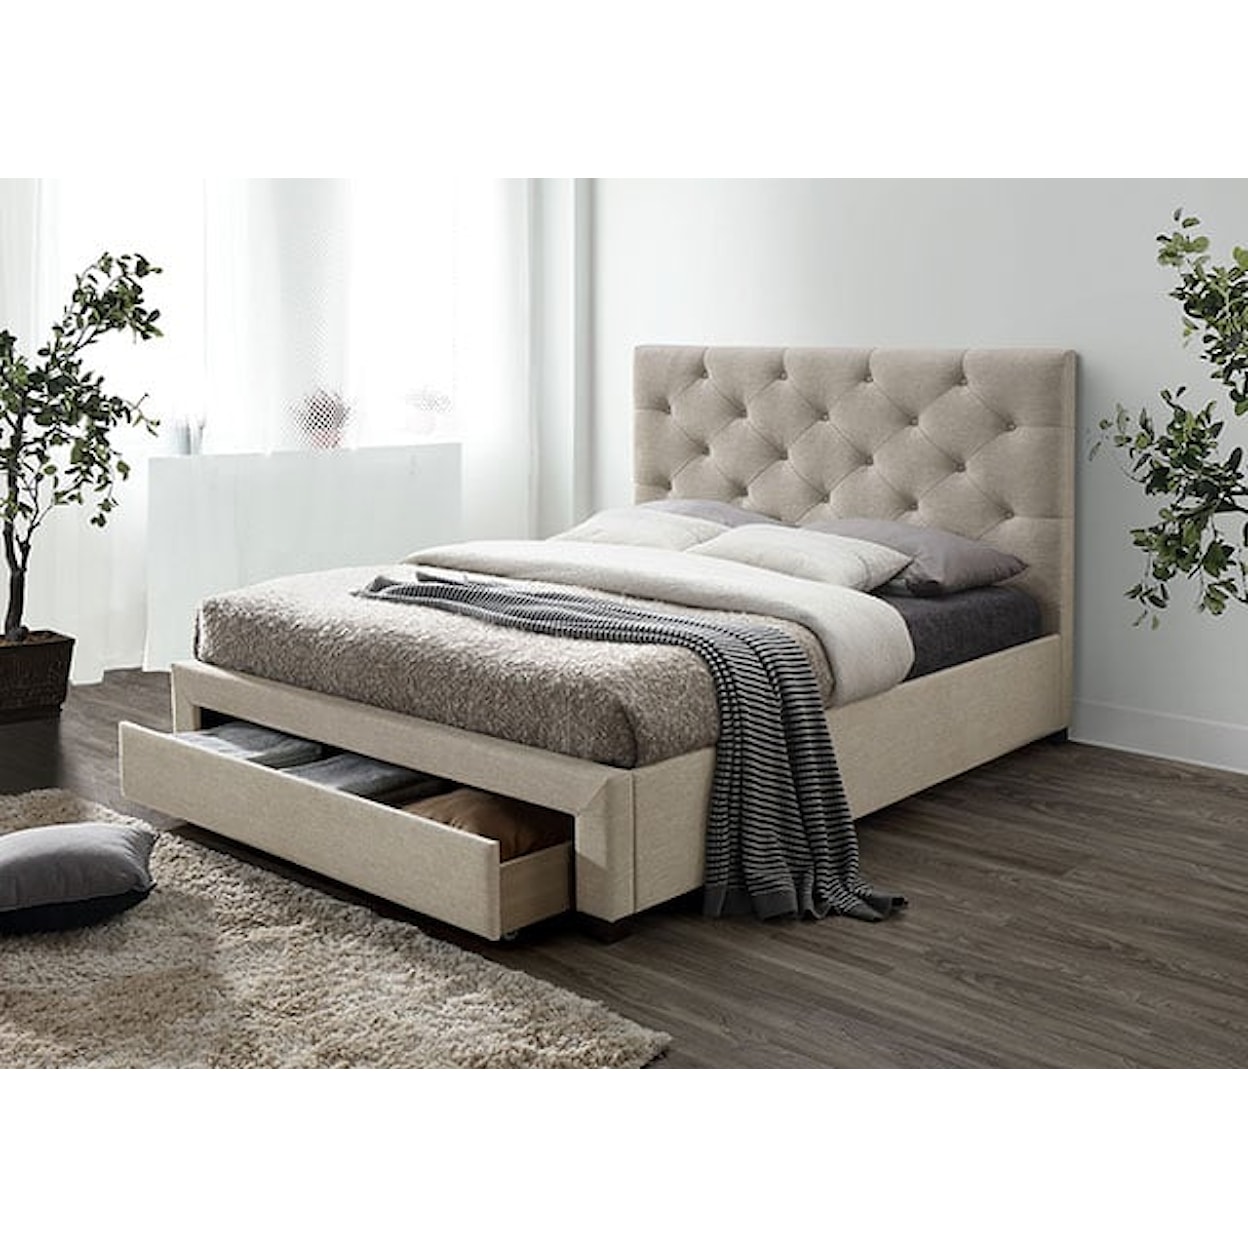 Furniture of America Sybella Youth Twin Storage Bed